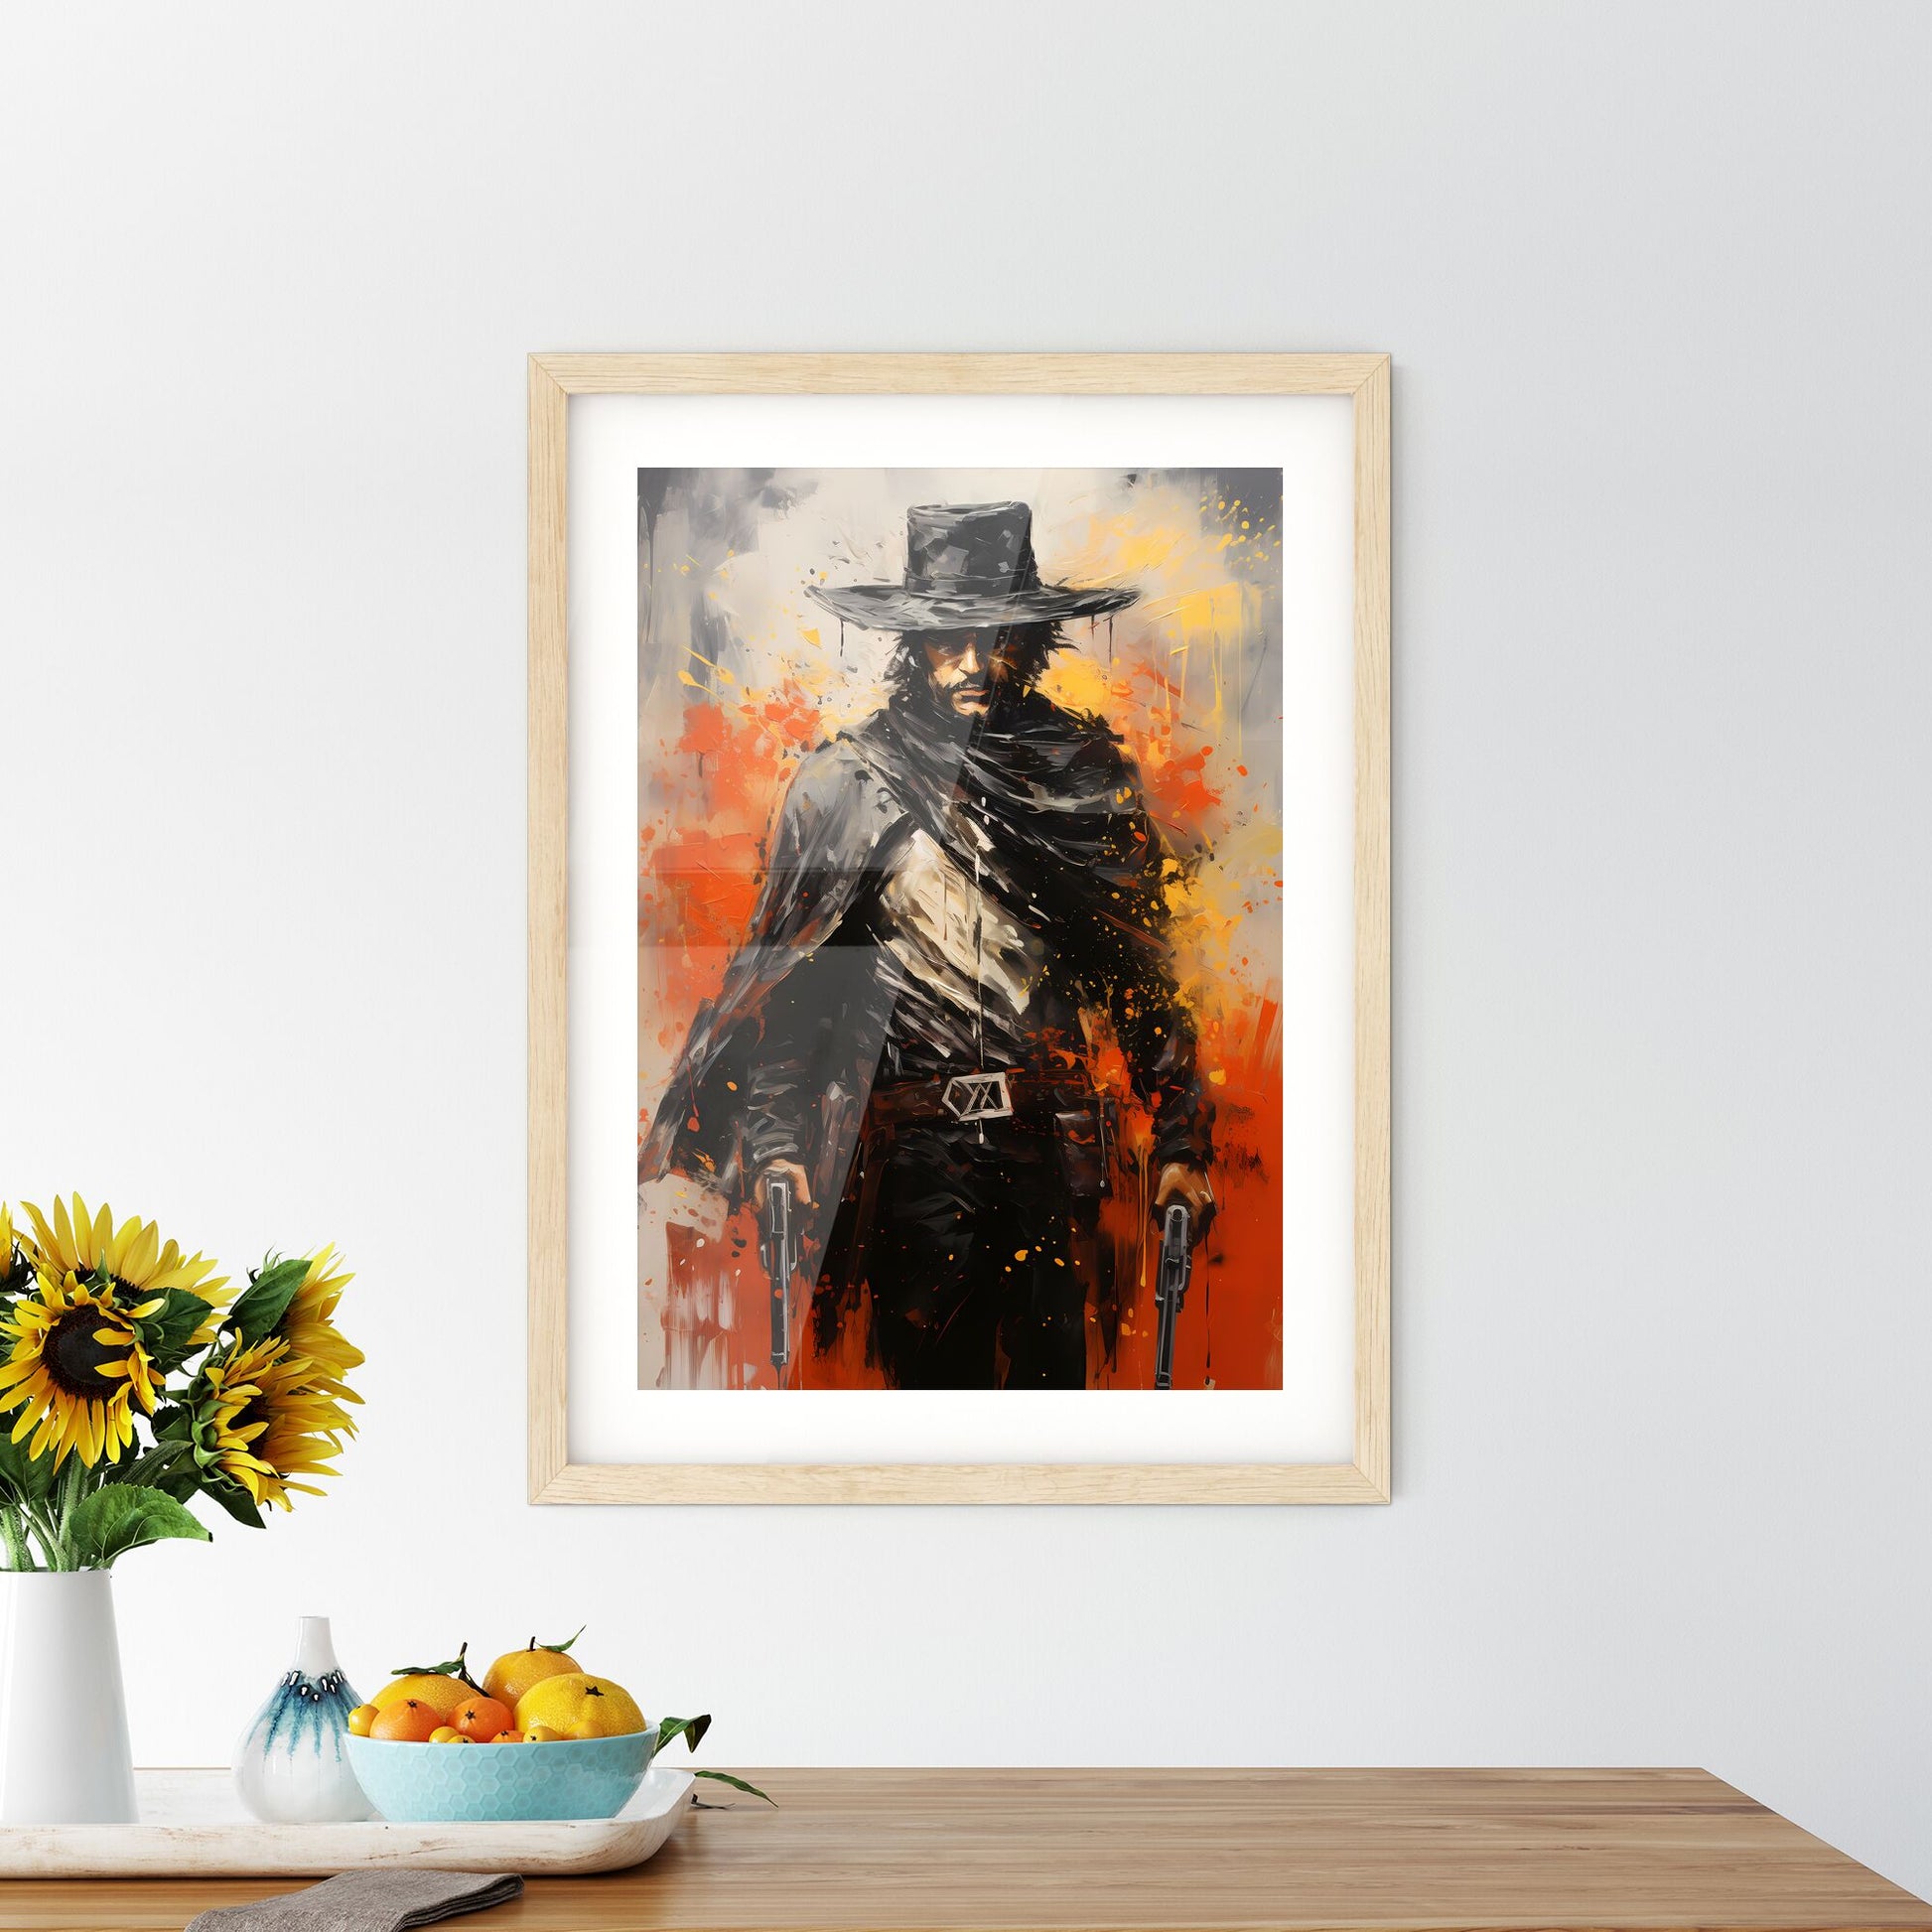 Zorro - A Painting Of A Man Holding Guns Default Title